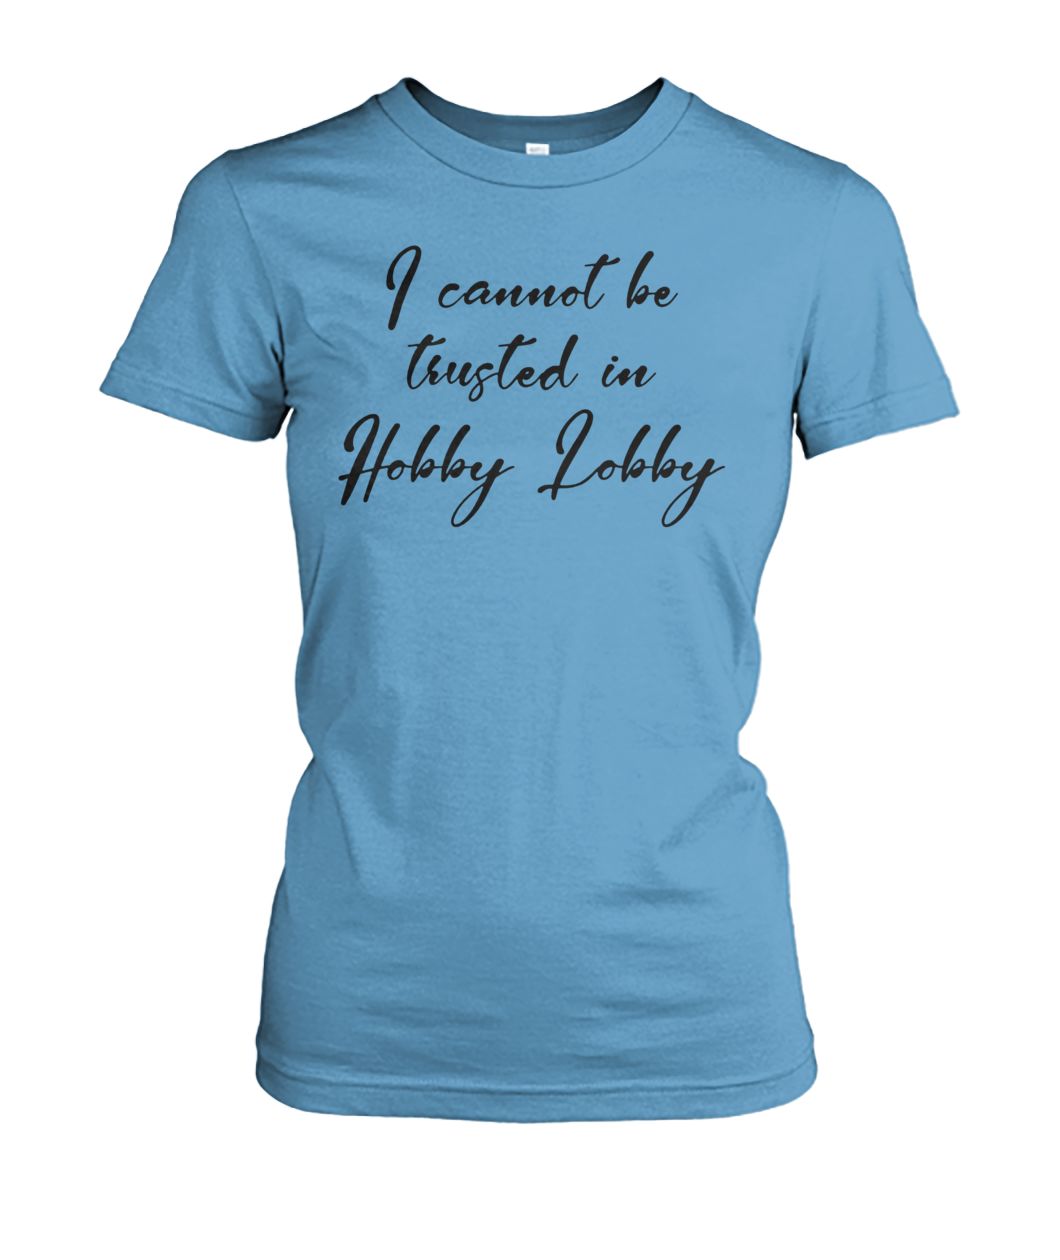 I cannot be trusted in hobby lobby women's crew tee